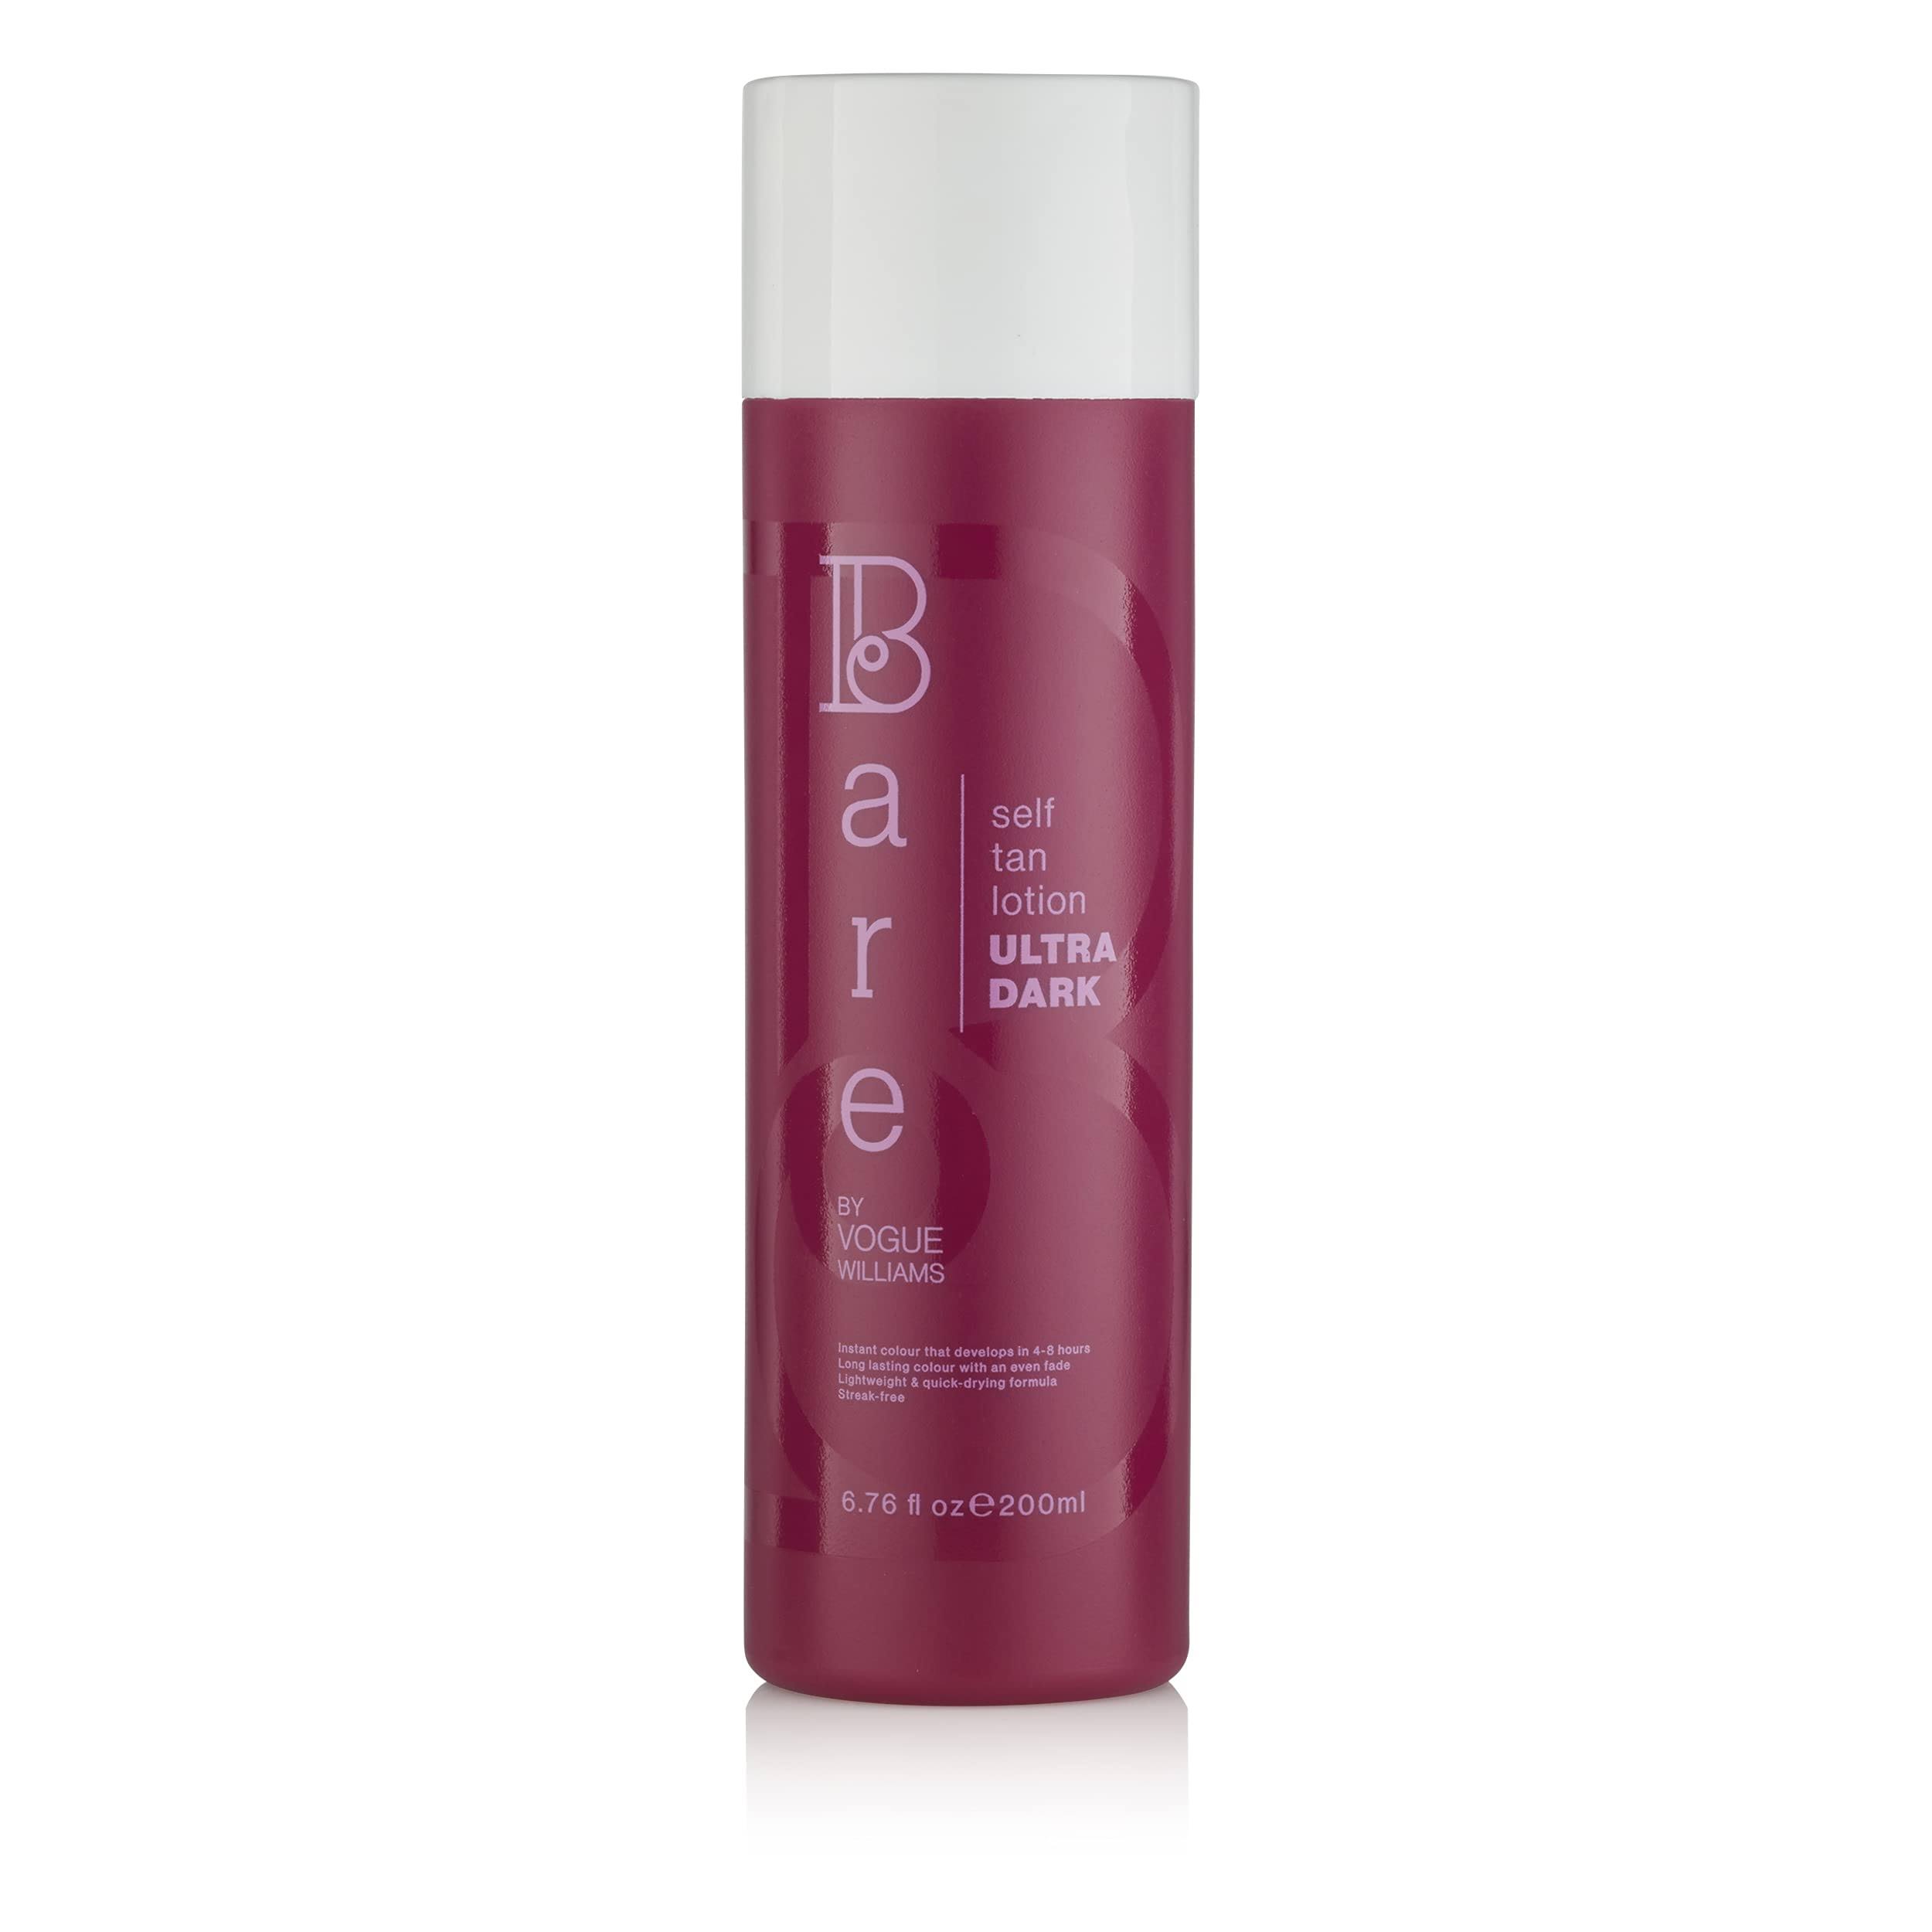 Bare by Vogue Self Tan Lotion - Ultra Dark